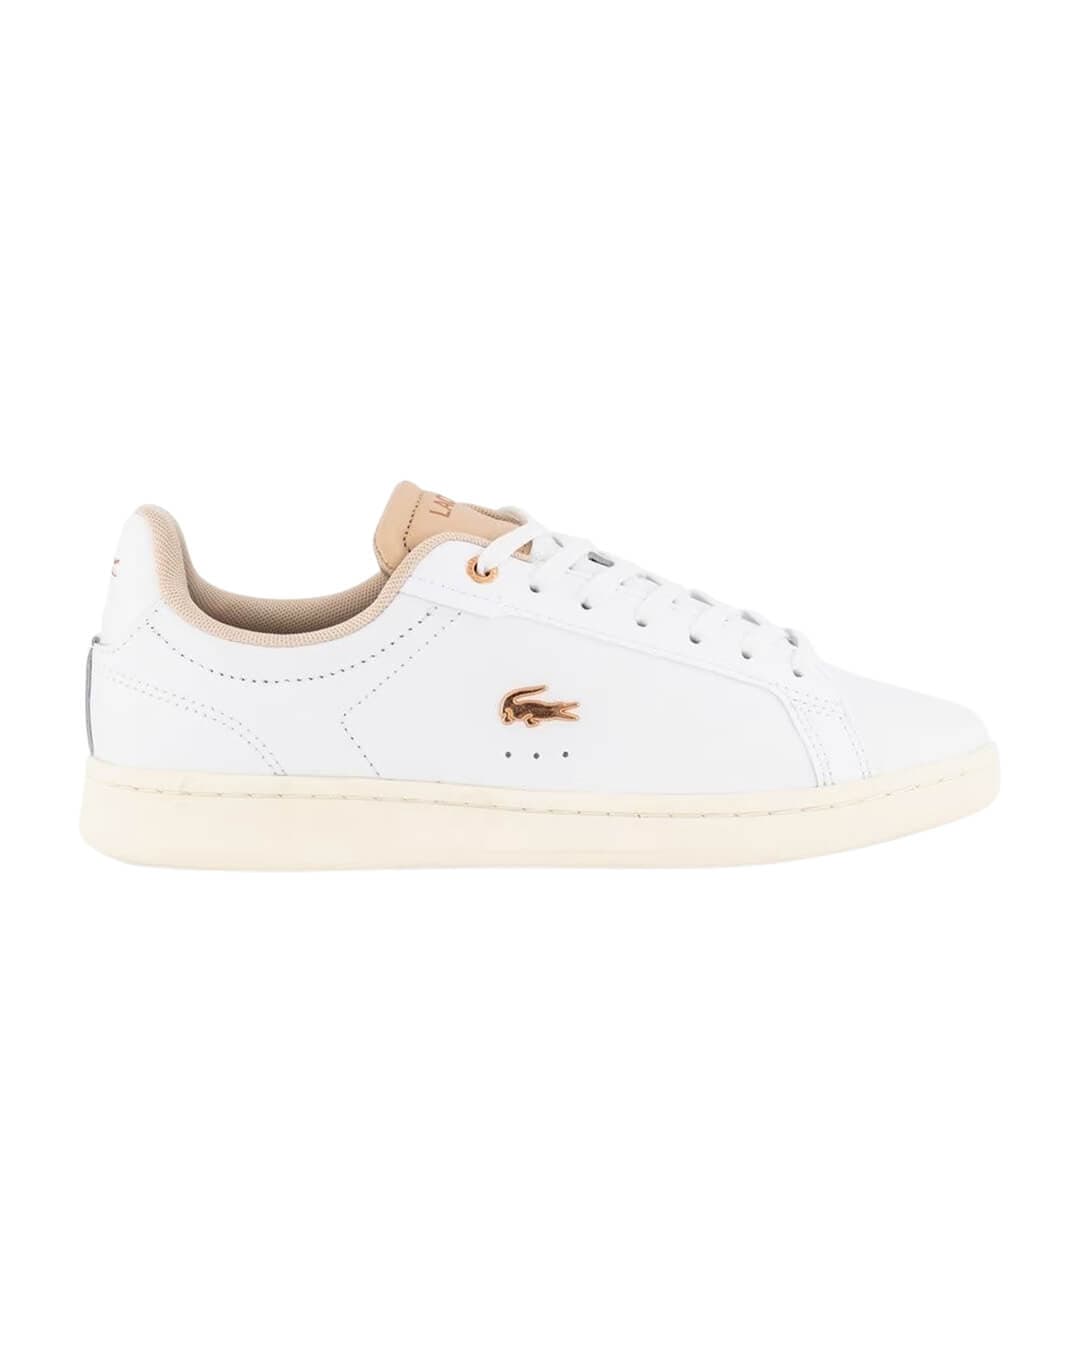 Lacoste Shoes Lacoste Carnaby Pro Leather White And Beige Sneakers